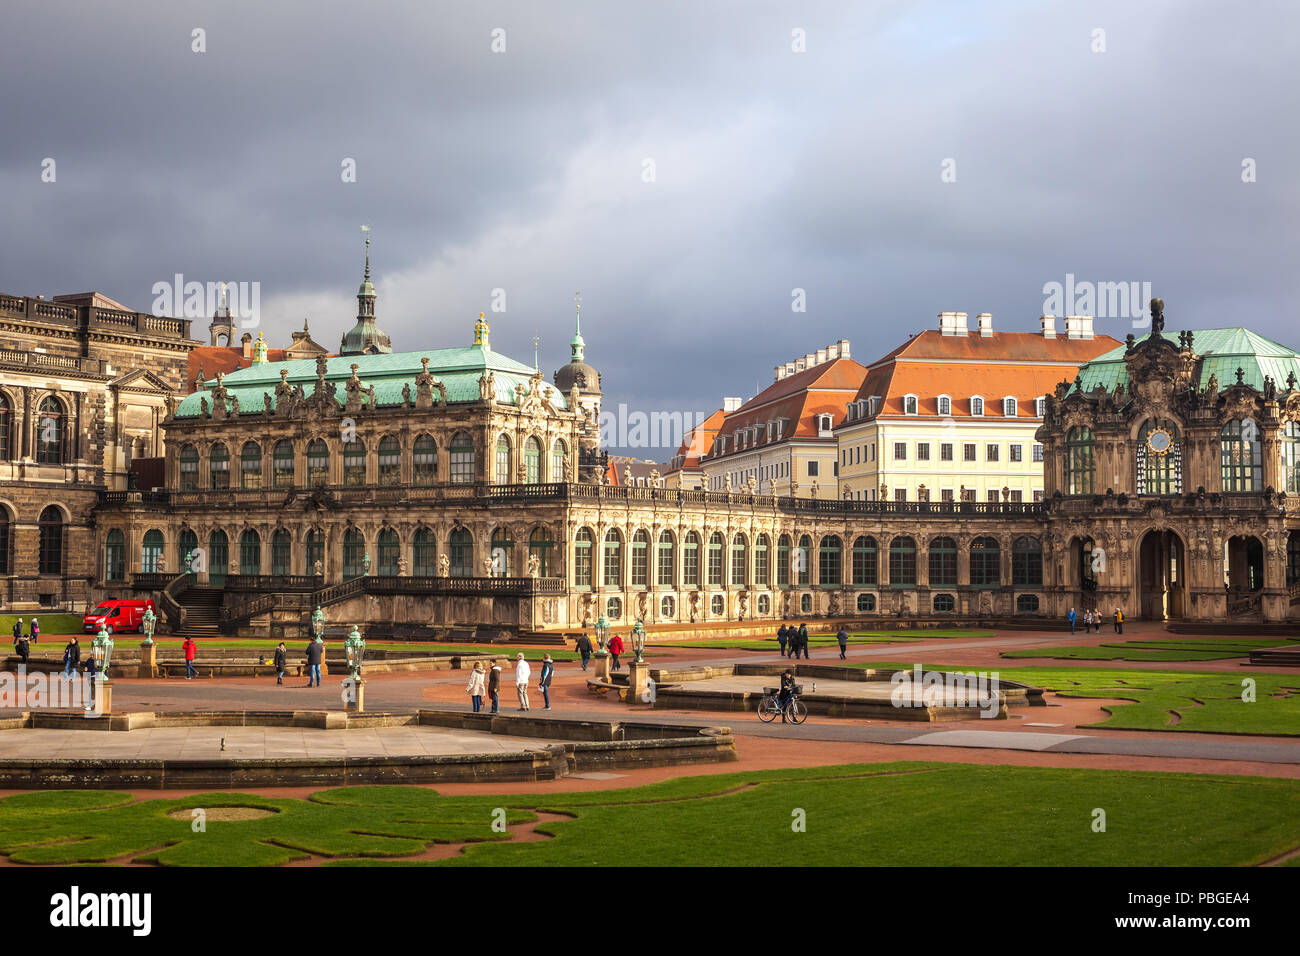 22.01.2018 Dresden, Germany - Zwinger Palace (architect Matthaus Poppelmann) - royal palace since 17 century in Dresden. Stock Photo